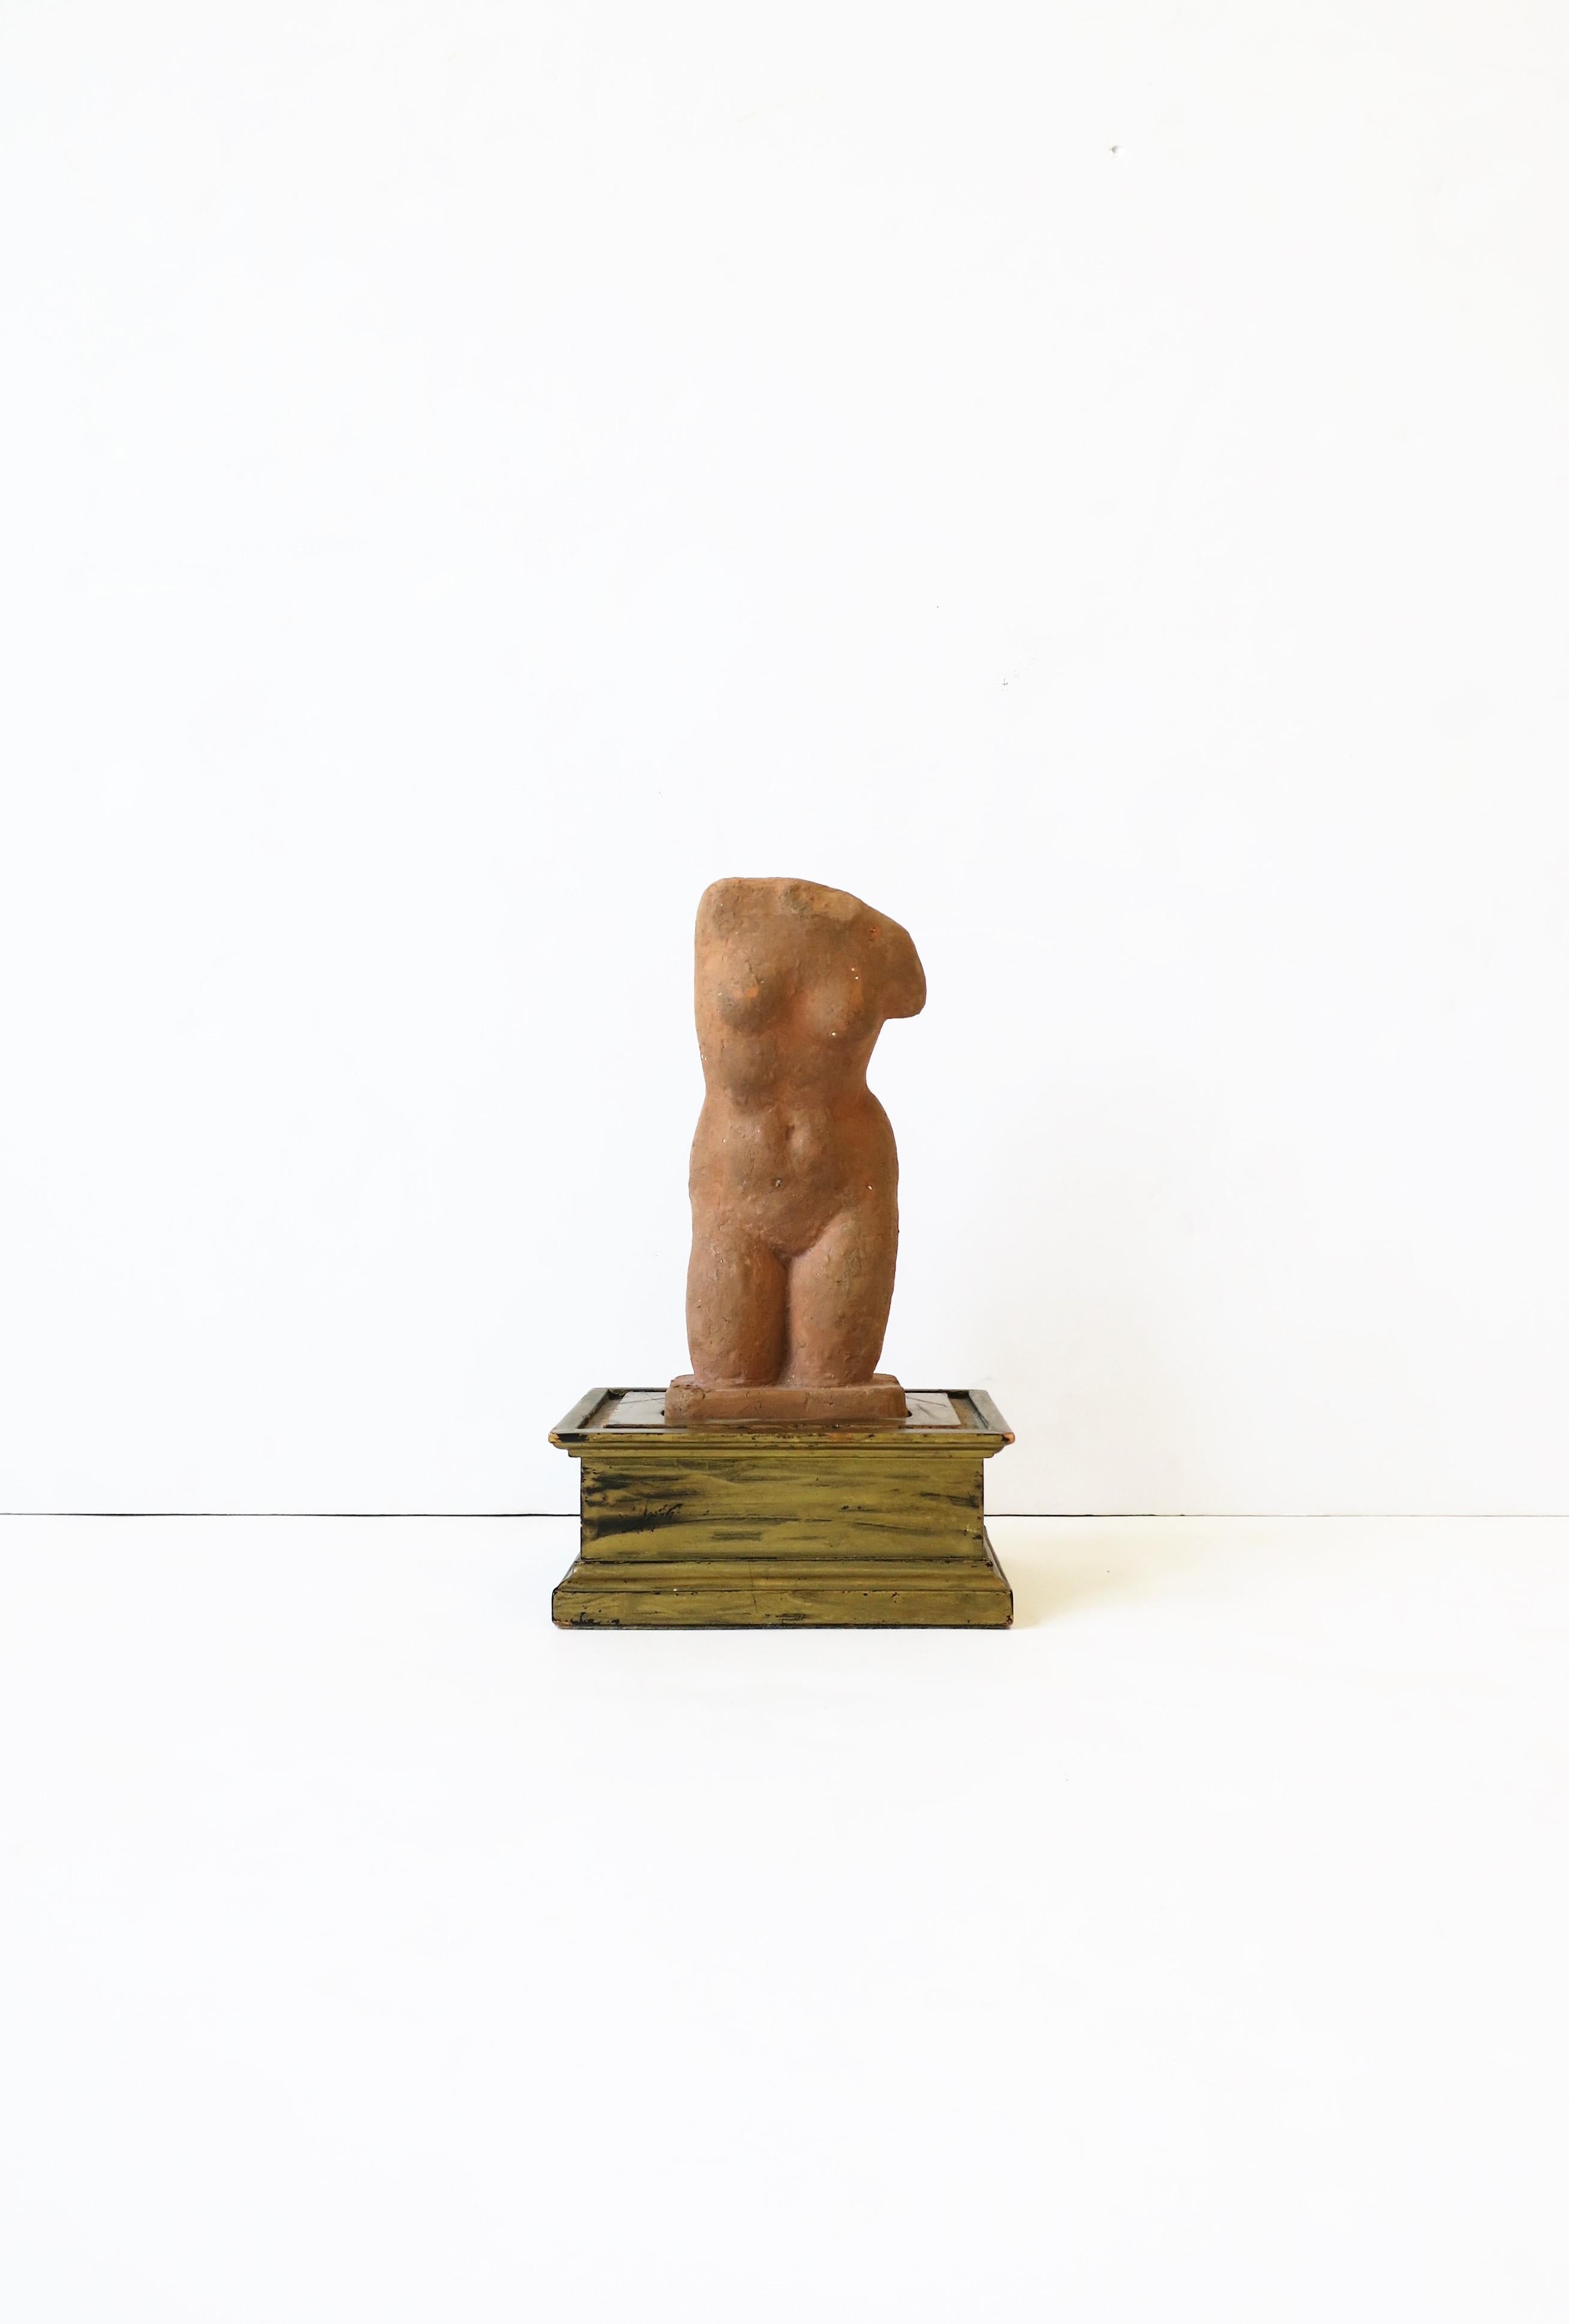 A vintage nude female torso sculpture of Aphrodite, a Greek Goddess, made of terracotta, on a rectangular wood base with a gold paint overlay, circa 20th century, from Paris, France. Sculpture is a reproduction based on Aphrodite from a French